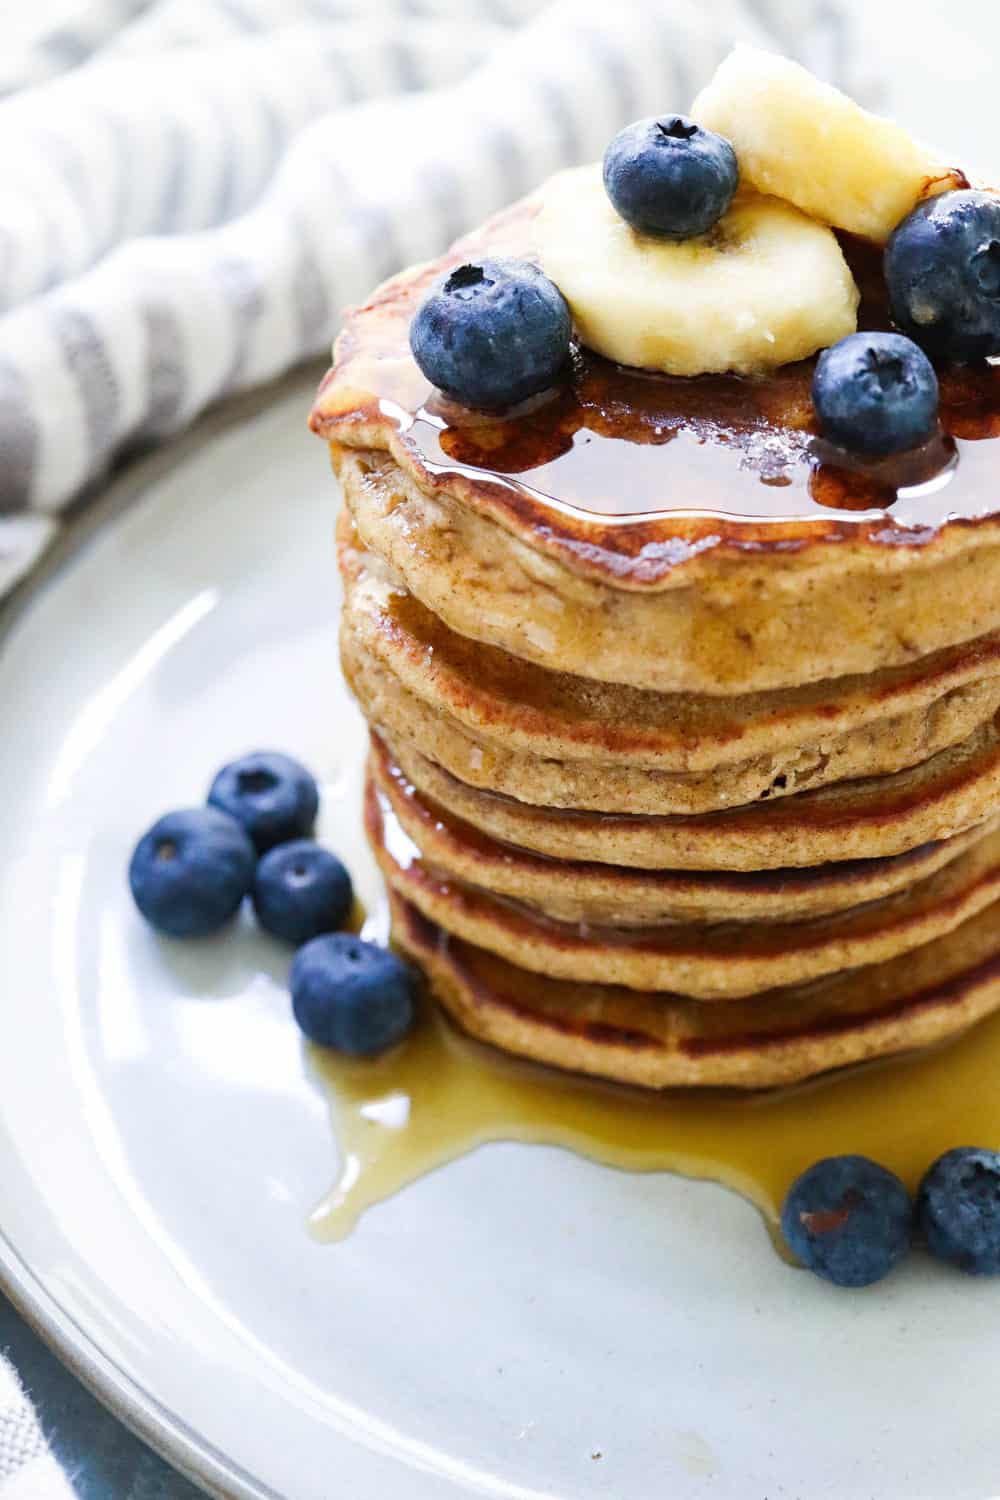 https://pinchmegood.com/wp-content/uploads/2020/08/Pile-of-pancakes-topped-with-syrup-on-a-gray-plate-with-fruit-on-it-scaled.jpg